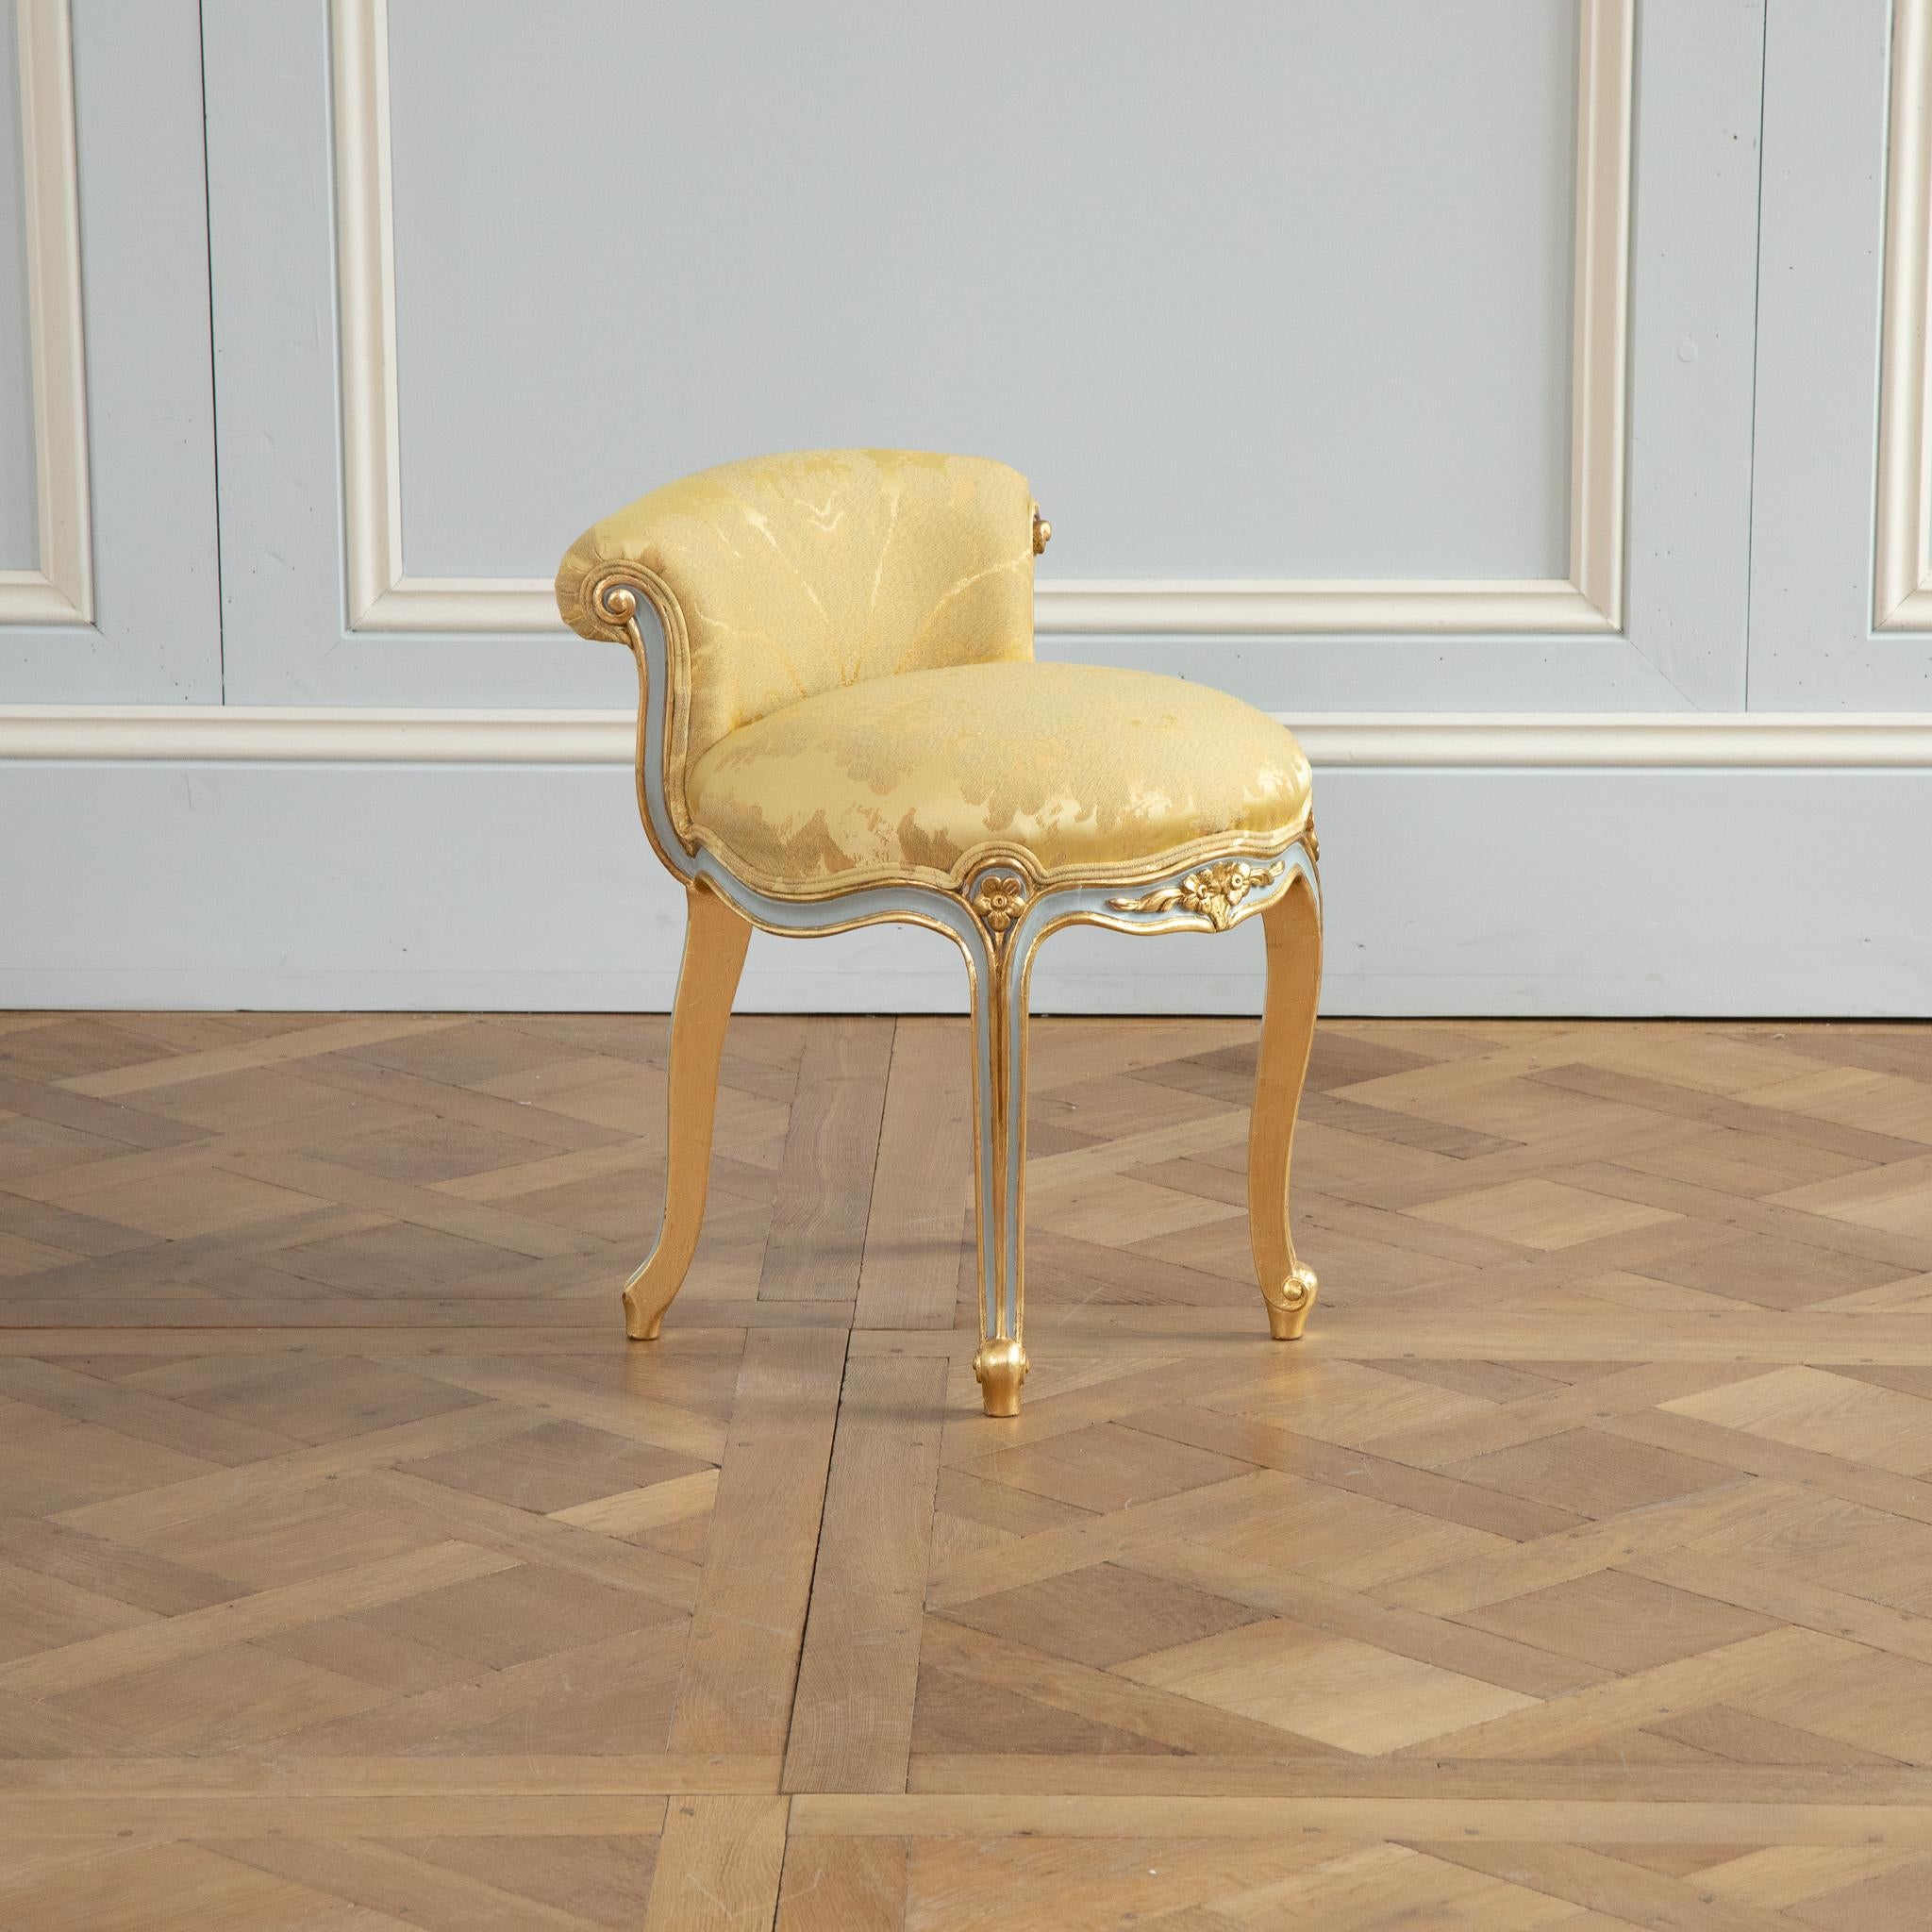 British Louis XVI Crosse Renverse Stool Painted with Gold Highlights For Sale